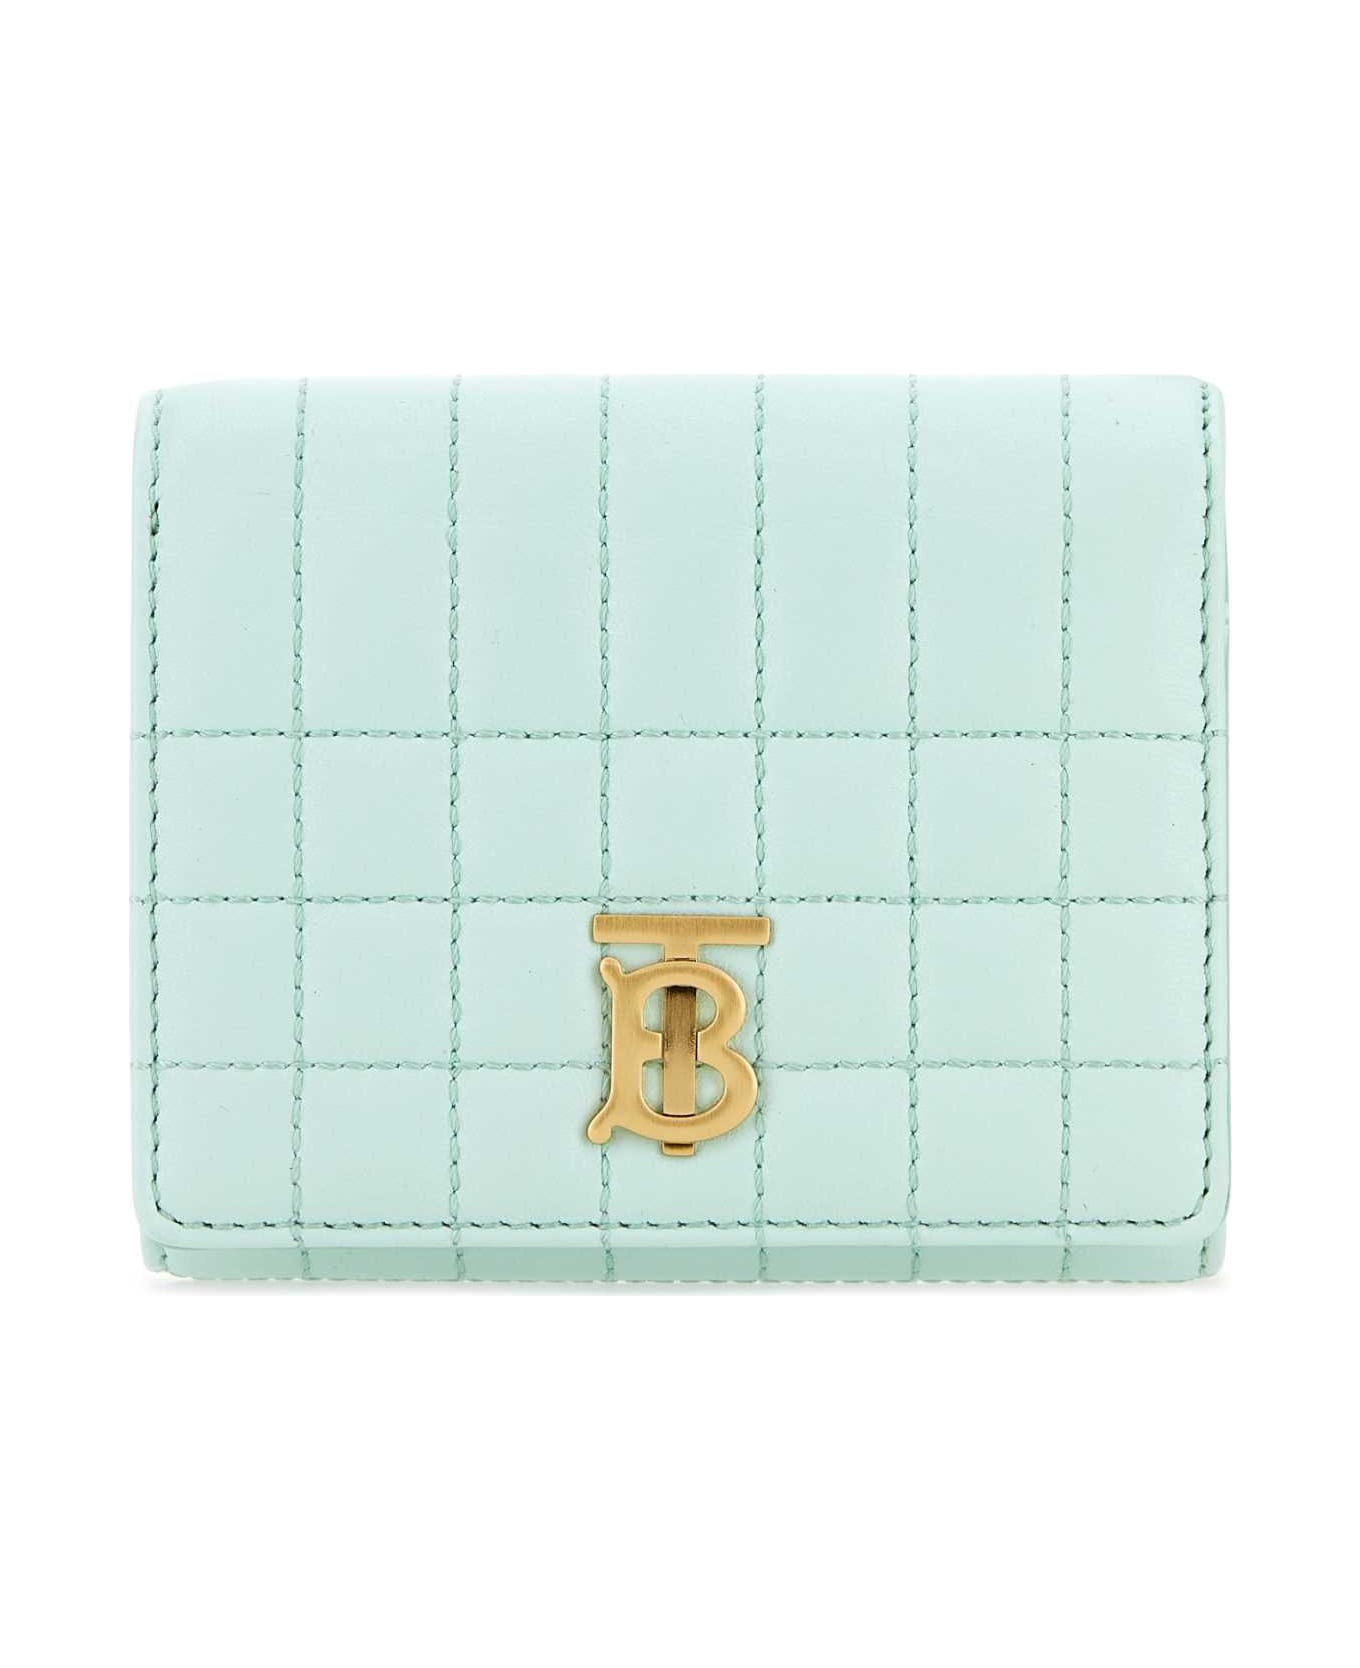 Burberry Pastel Light-blue Nappa Leather Small Lola Wallet - COOLMINT 財布